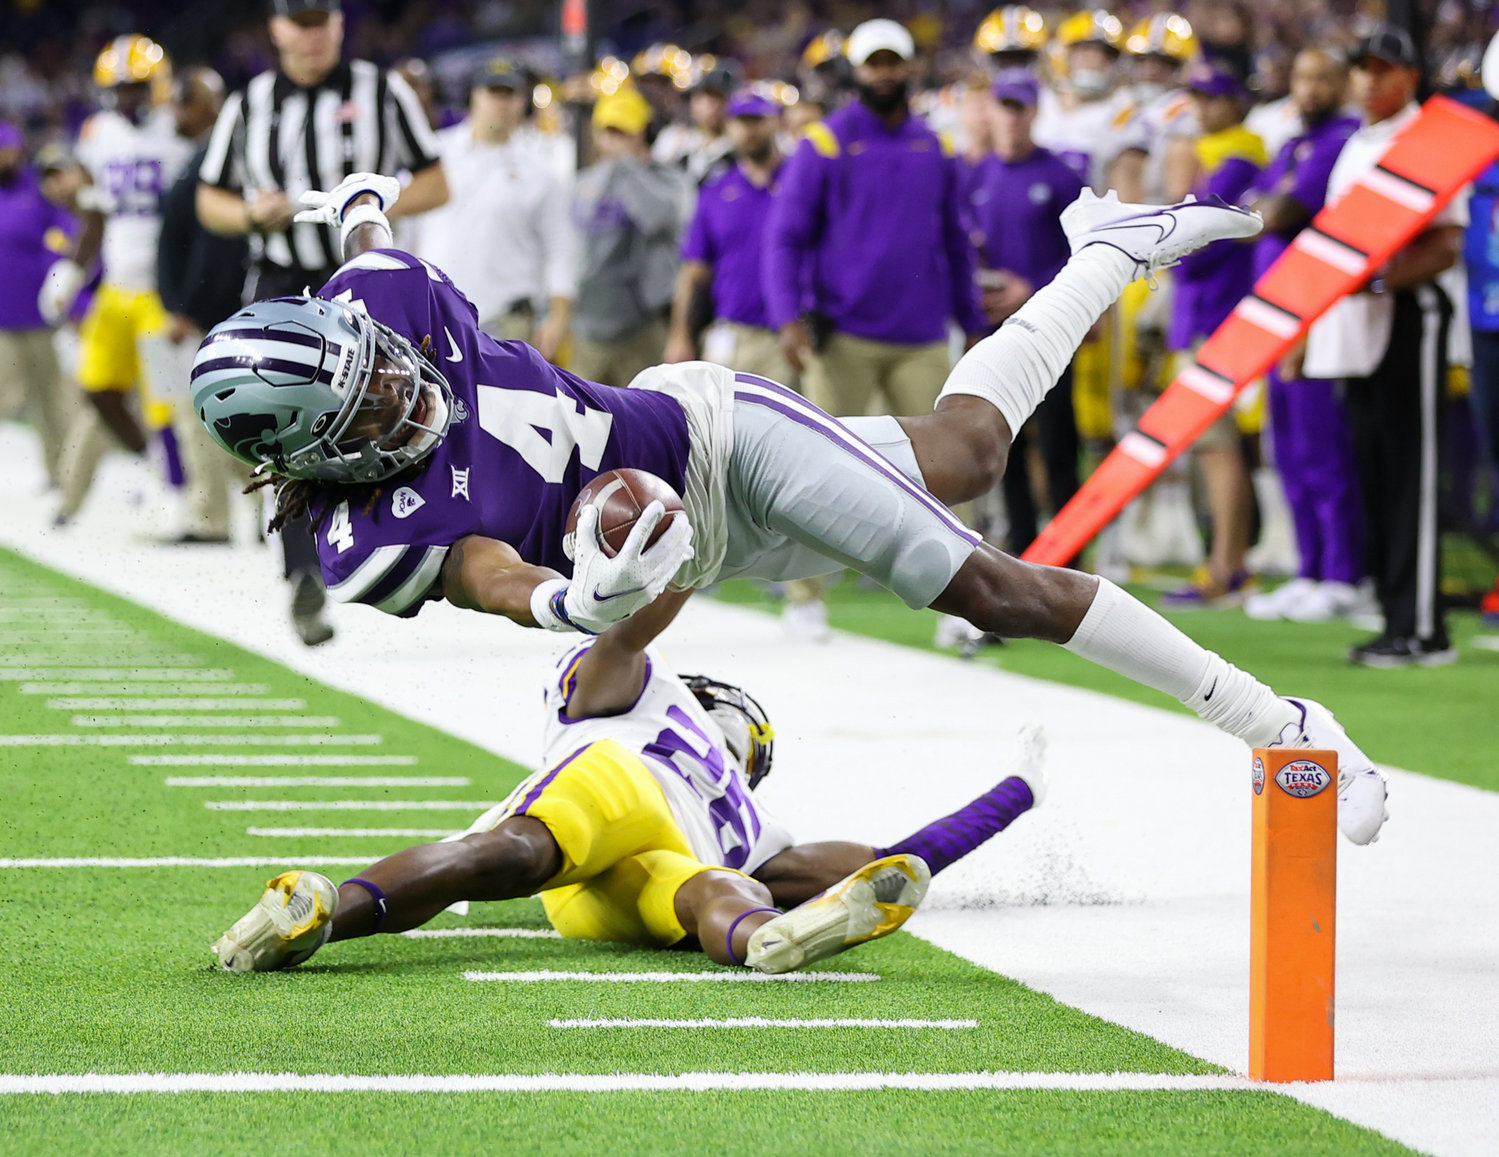 Kansas State Wildcats wide receiver Malik Knowles (4) scores on a touchdown reception during the TaxAct Texas Bowl on Jan. 4, 2022 in Houston, Texas.